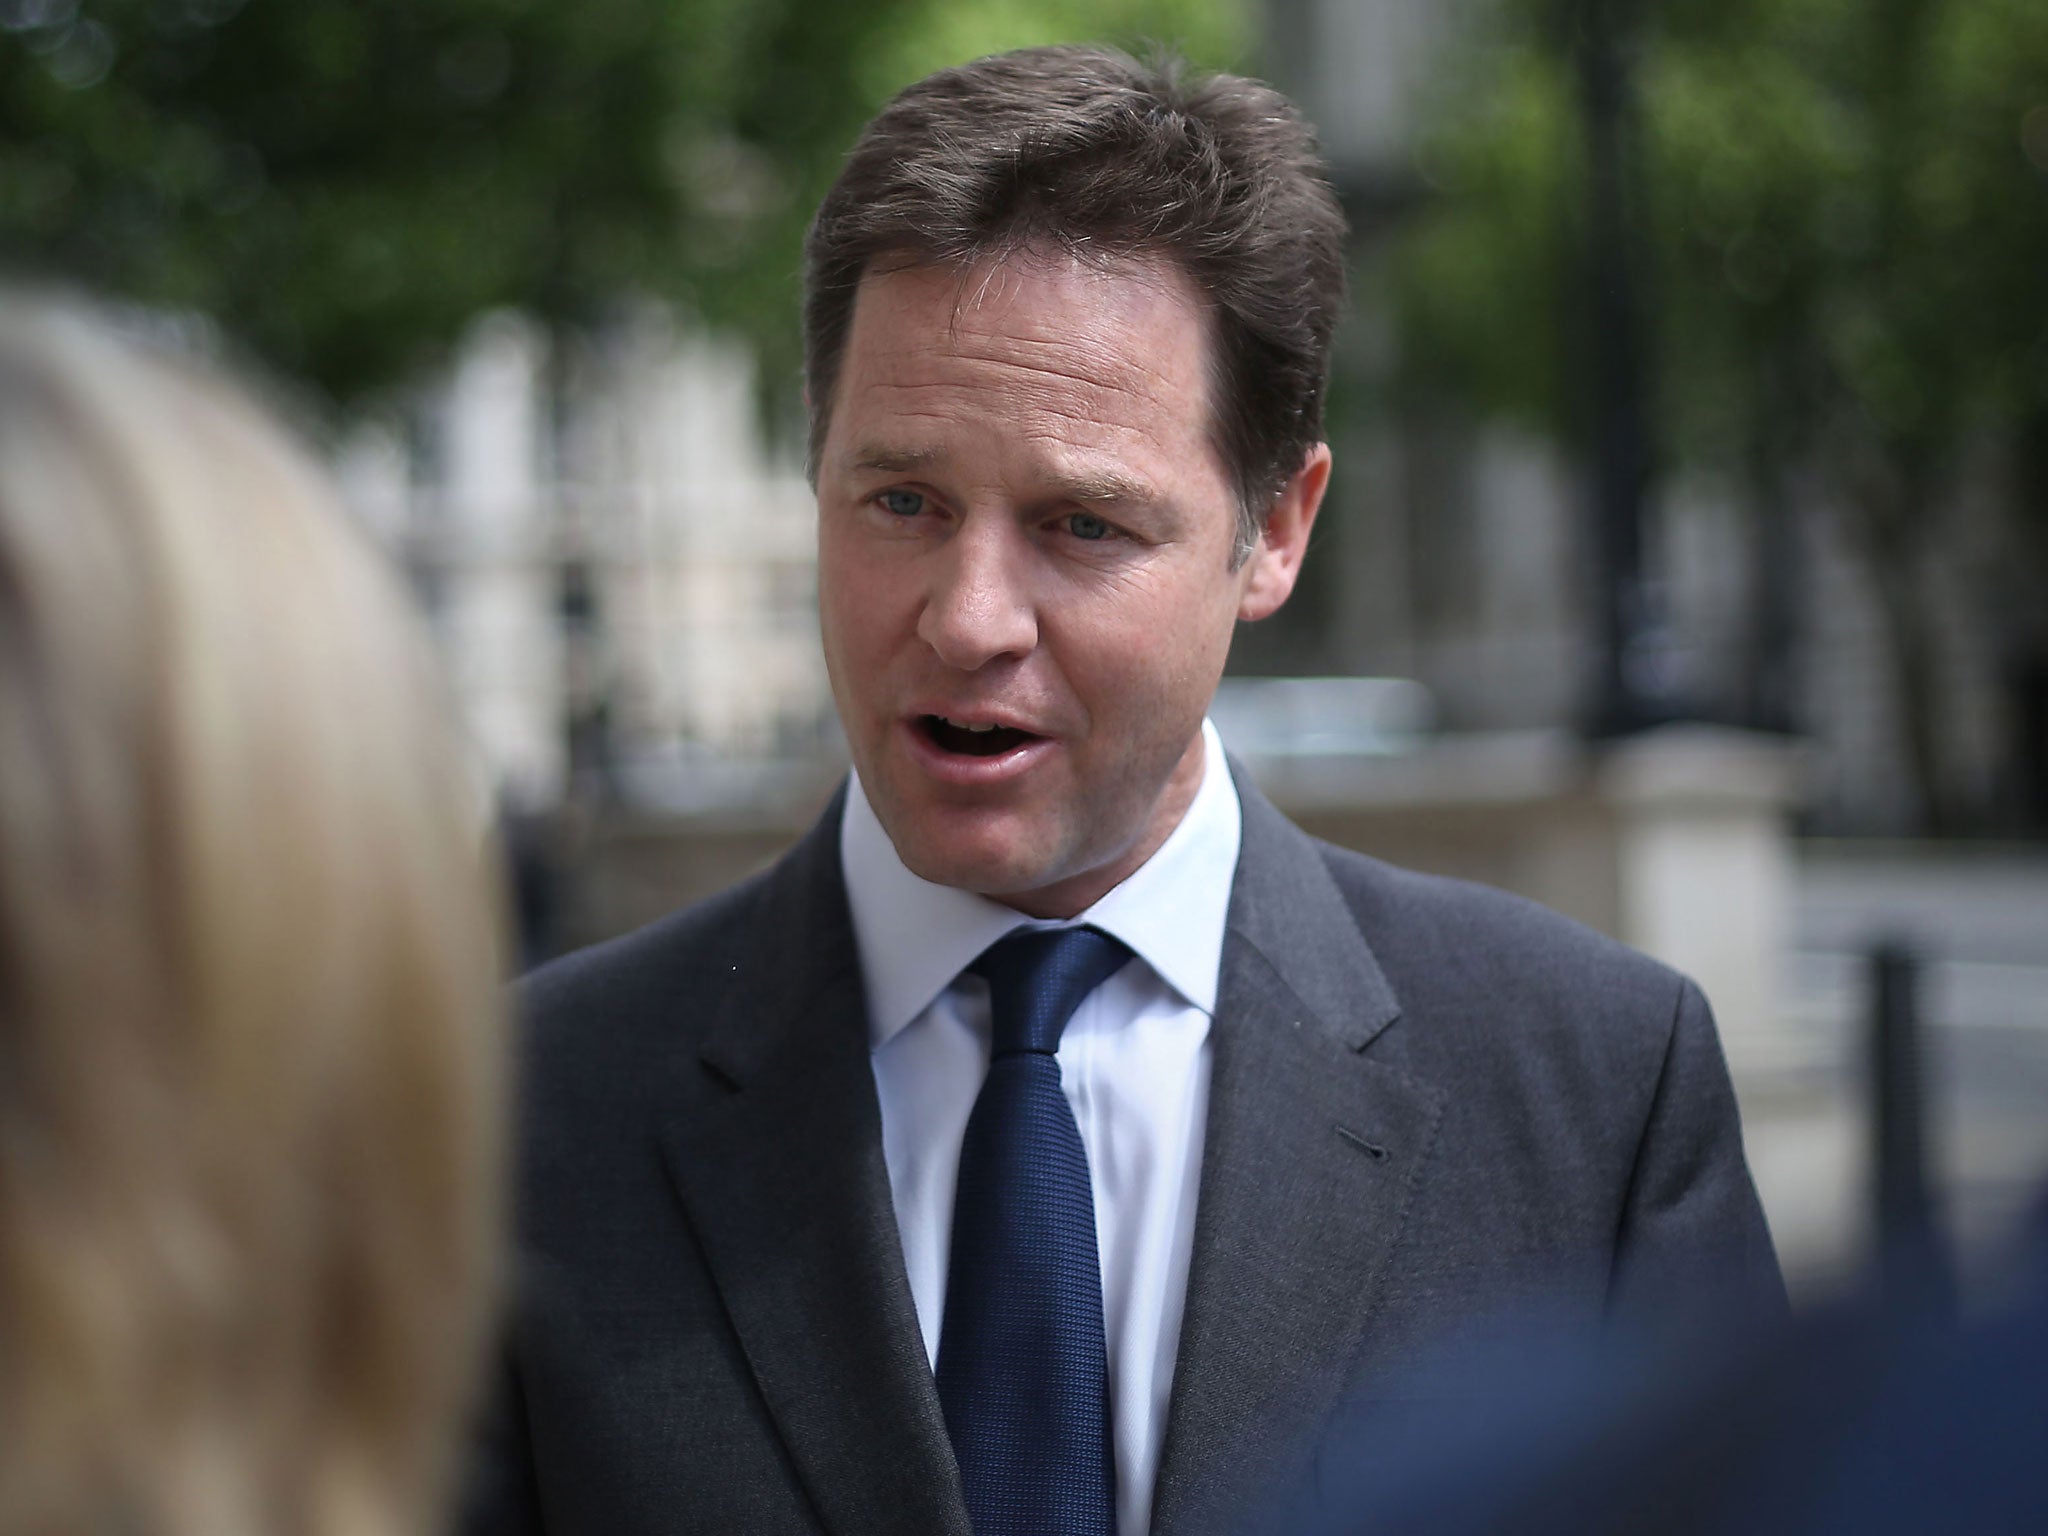 Activists have dubbed Mr Clegg 'toxic' and plan to force a leadership contest this summer